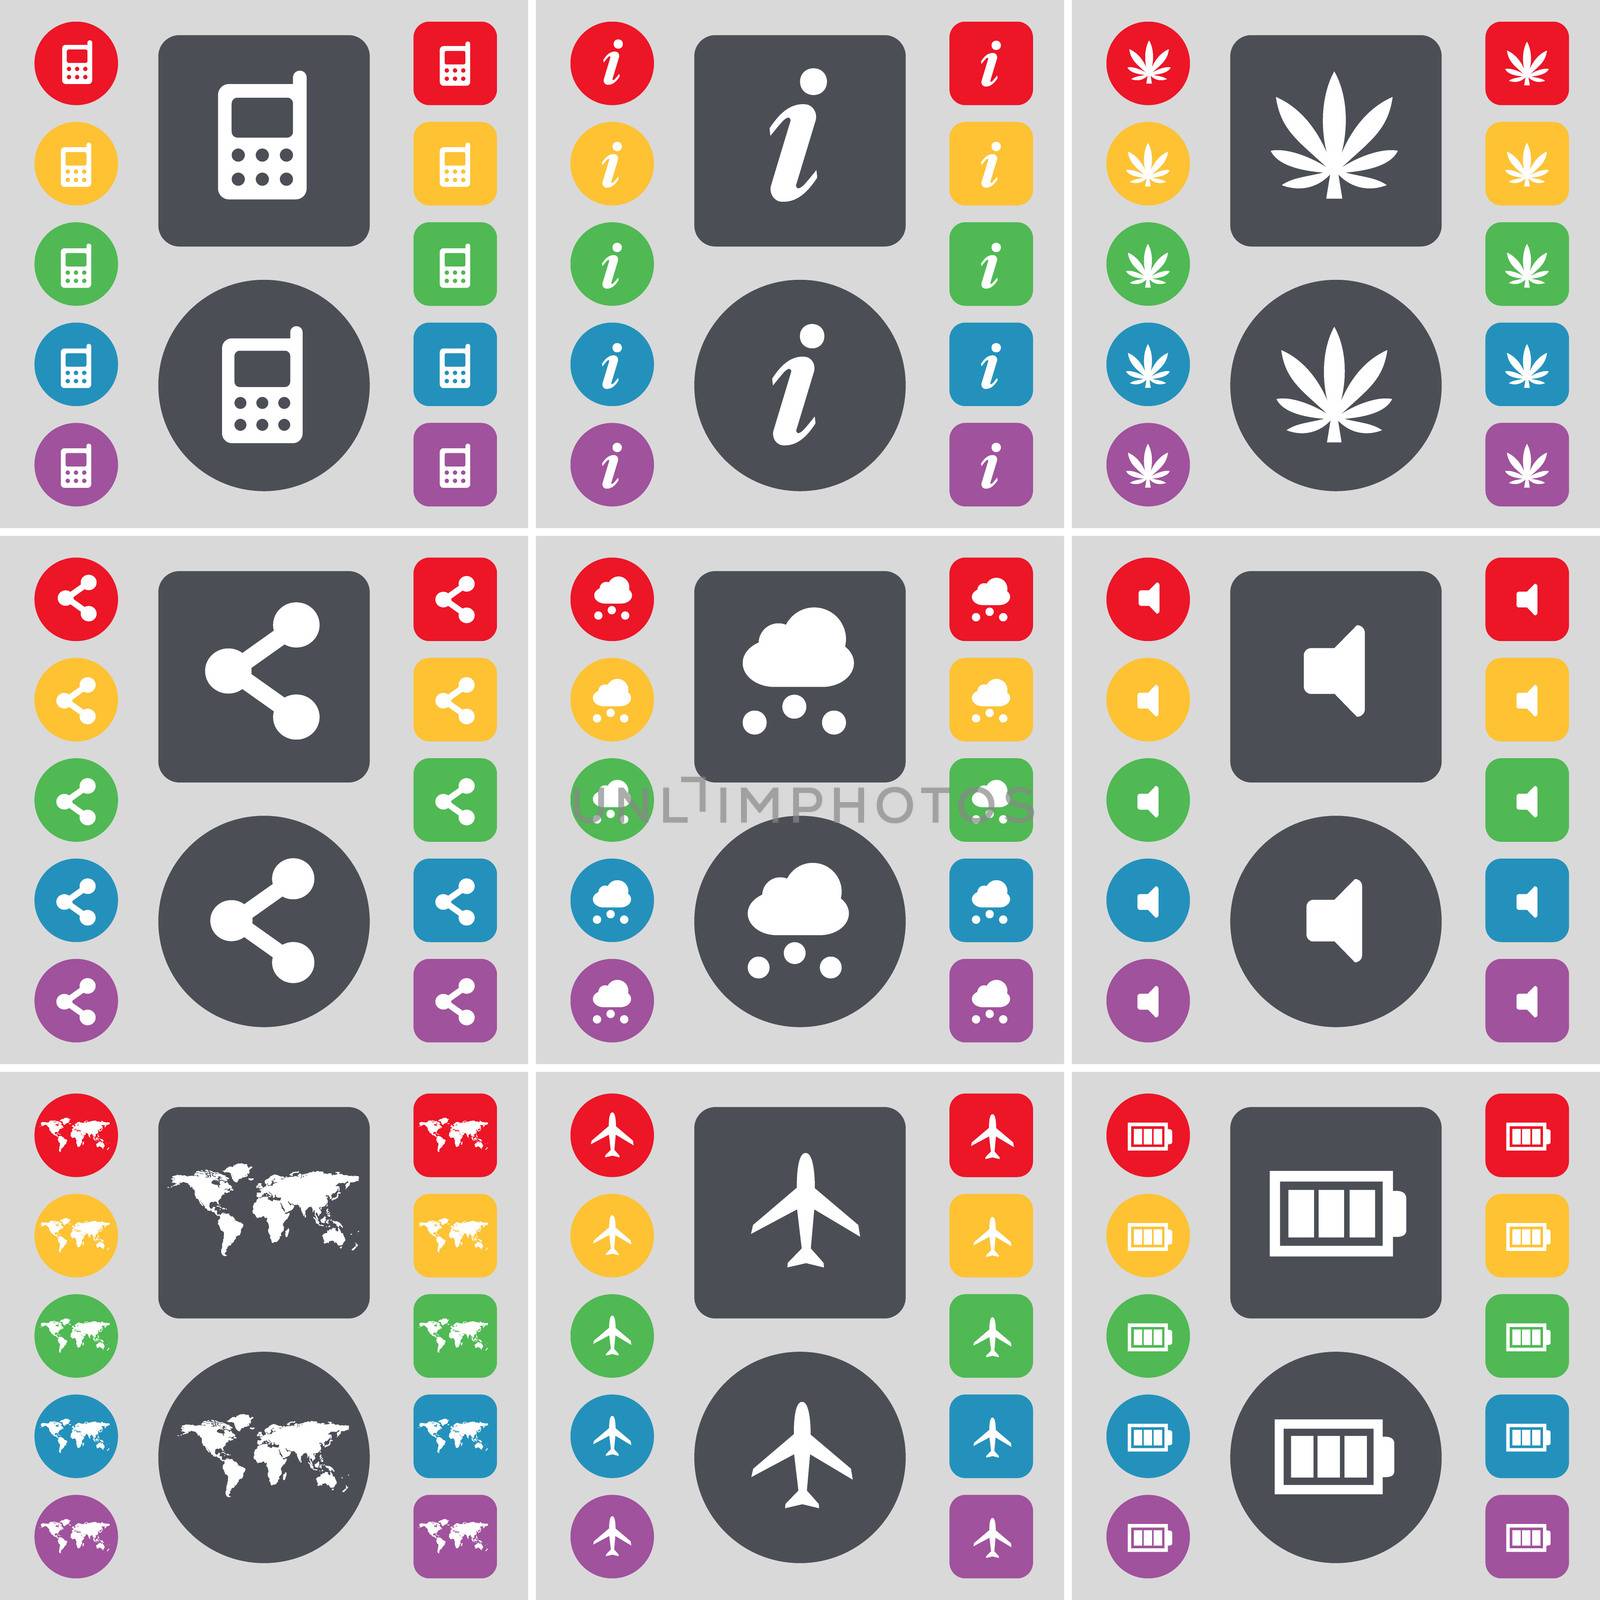 Mobile phone, Information, Marijuana, Share, Cloud, Sound, Globe, Airplane, Battery icon symbol. A large set of flat, colored buttons for your design. illustration